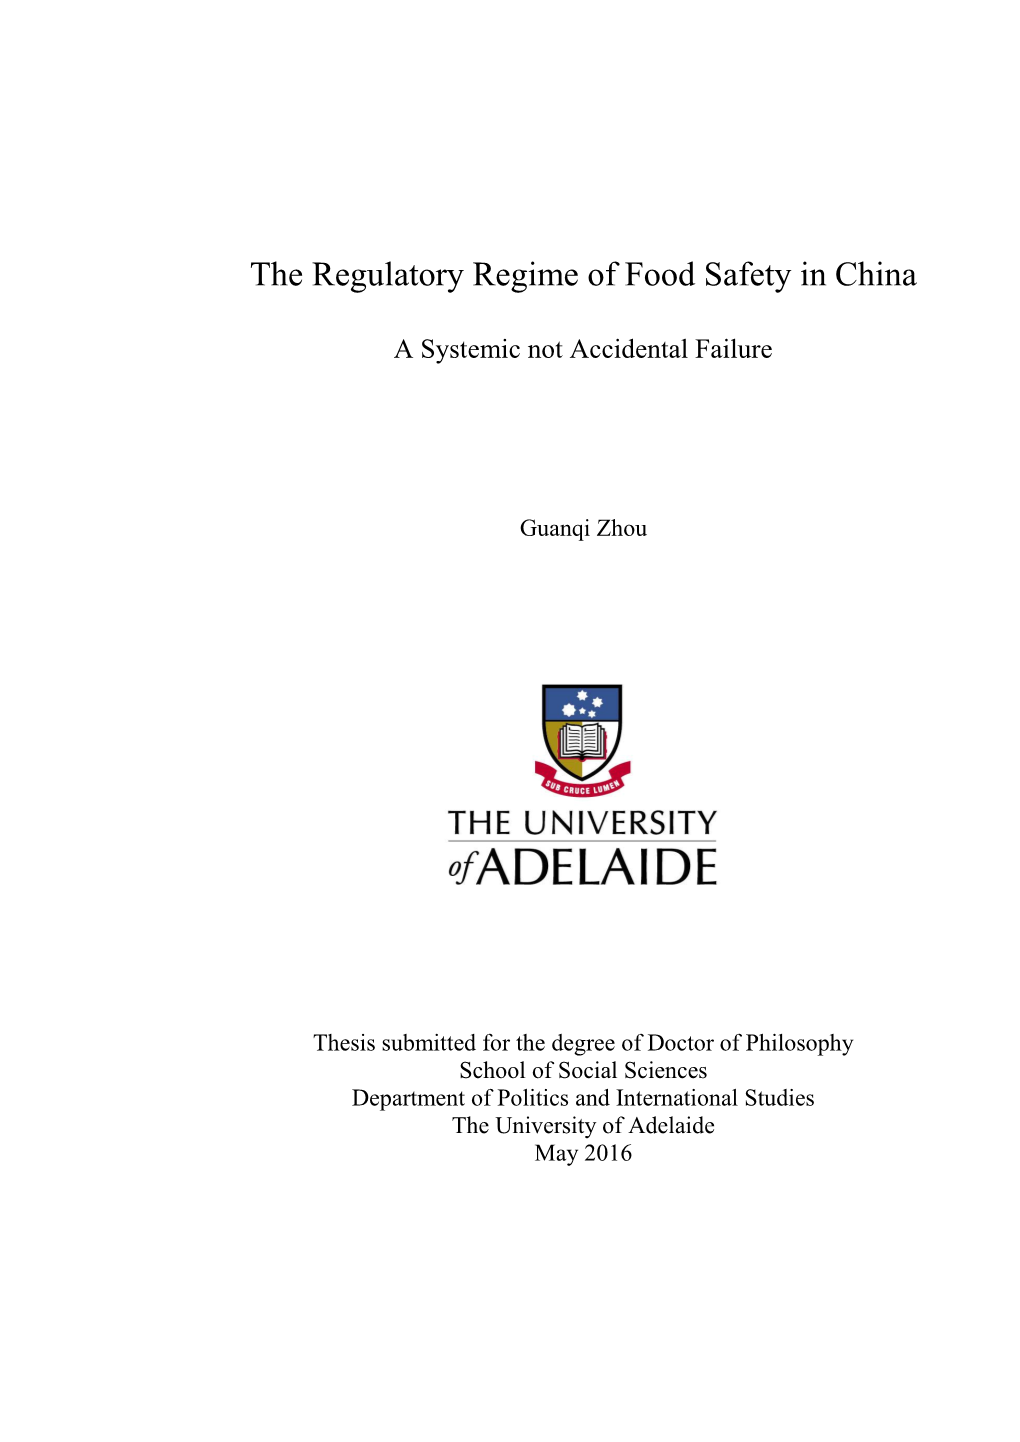 The Regulatory Regime of Food Safety in China: a Systemic Not